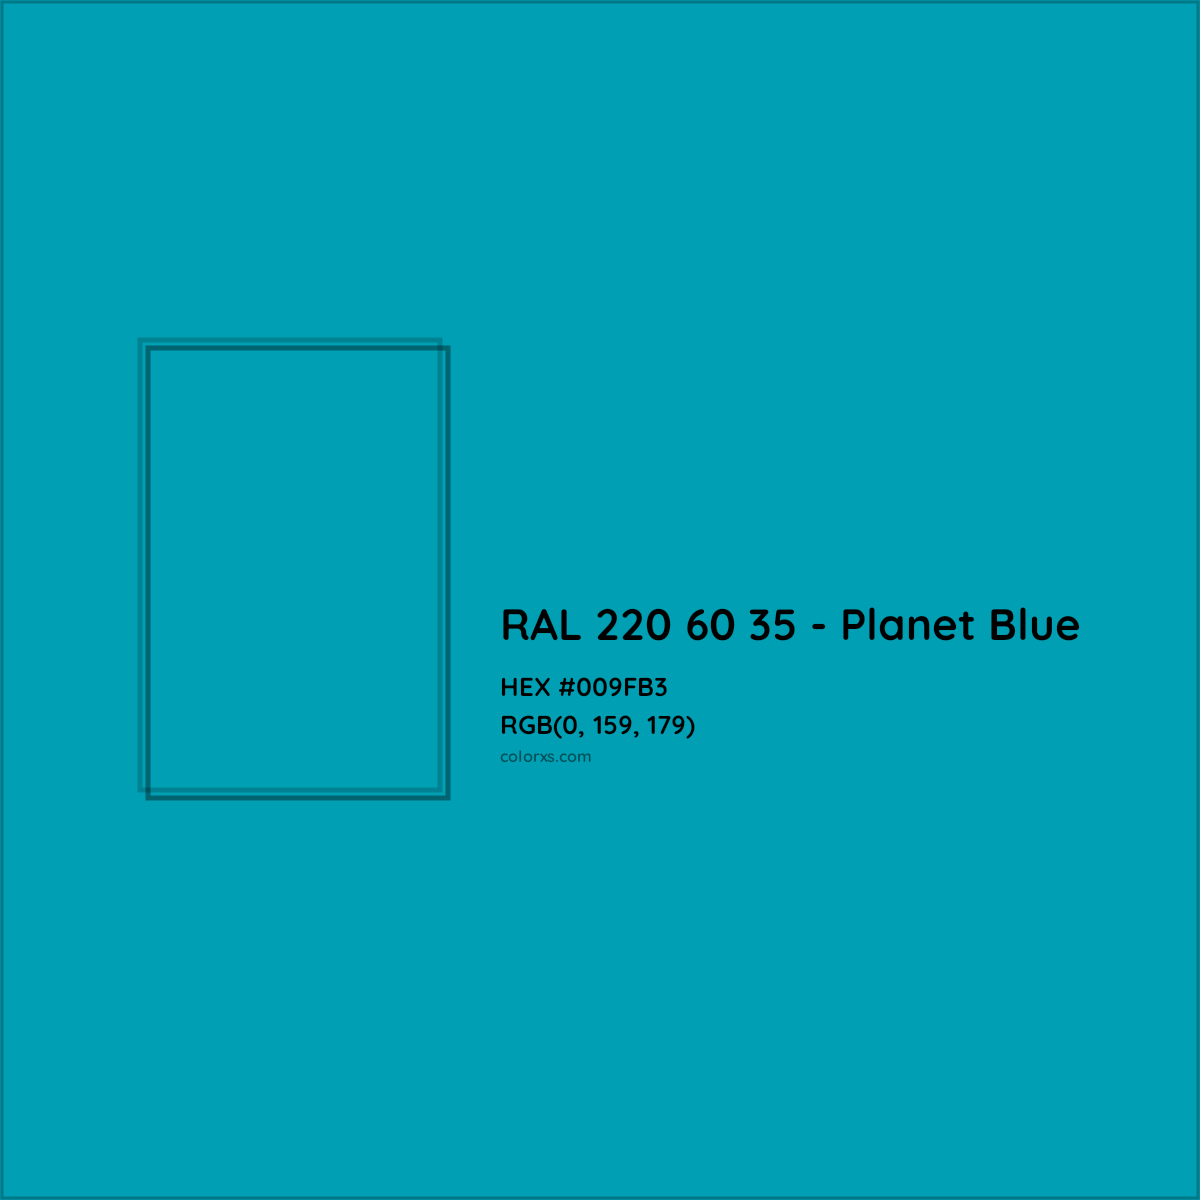 HEX #009FB3 RAL 220 60 35 - Planet Blue CMS RAL Design - Color Code